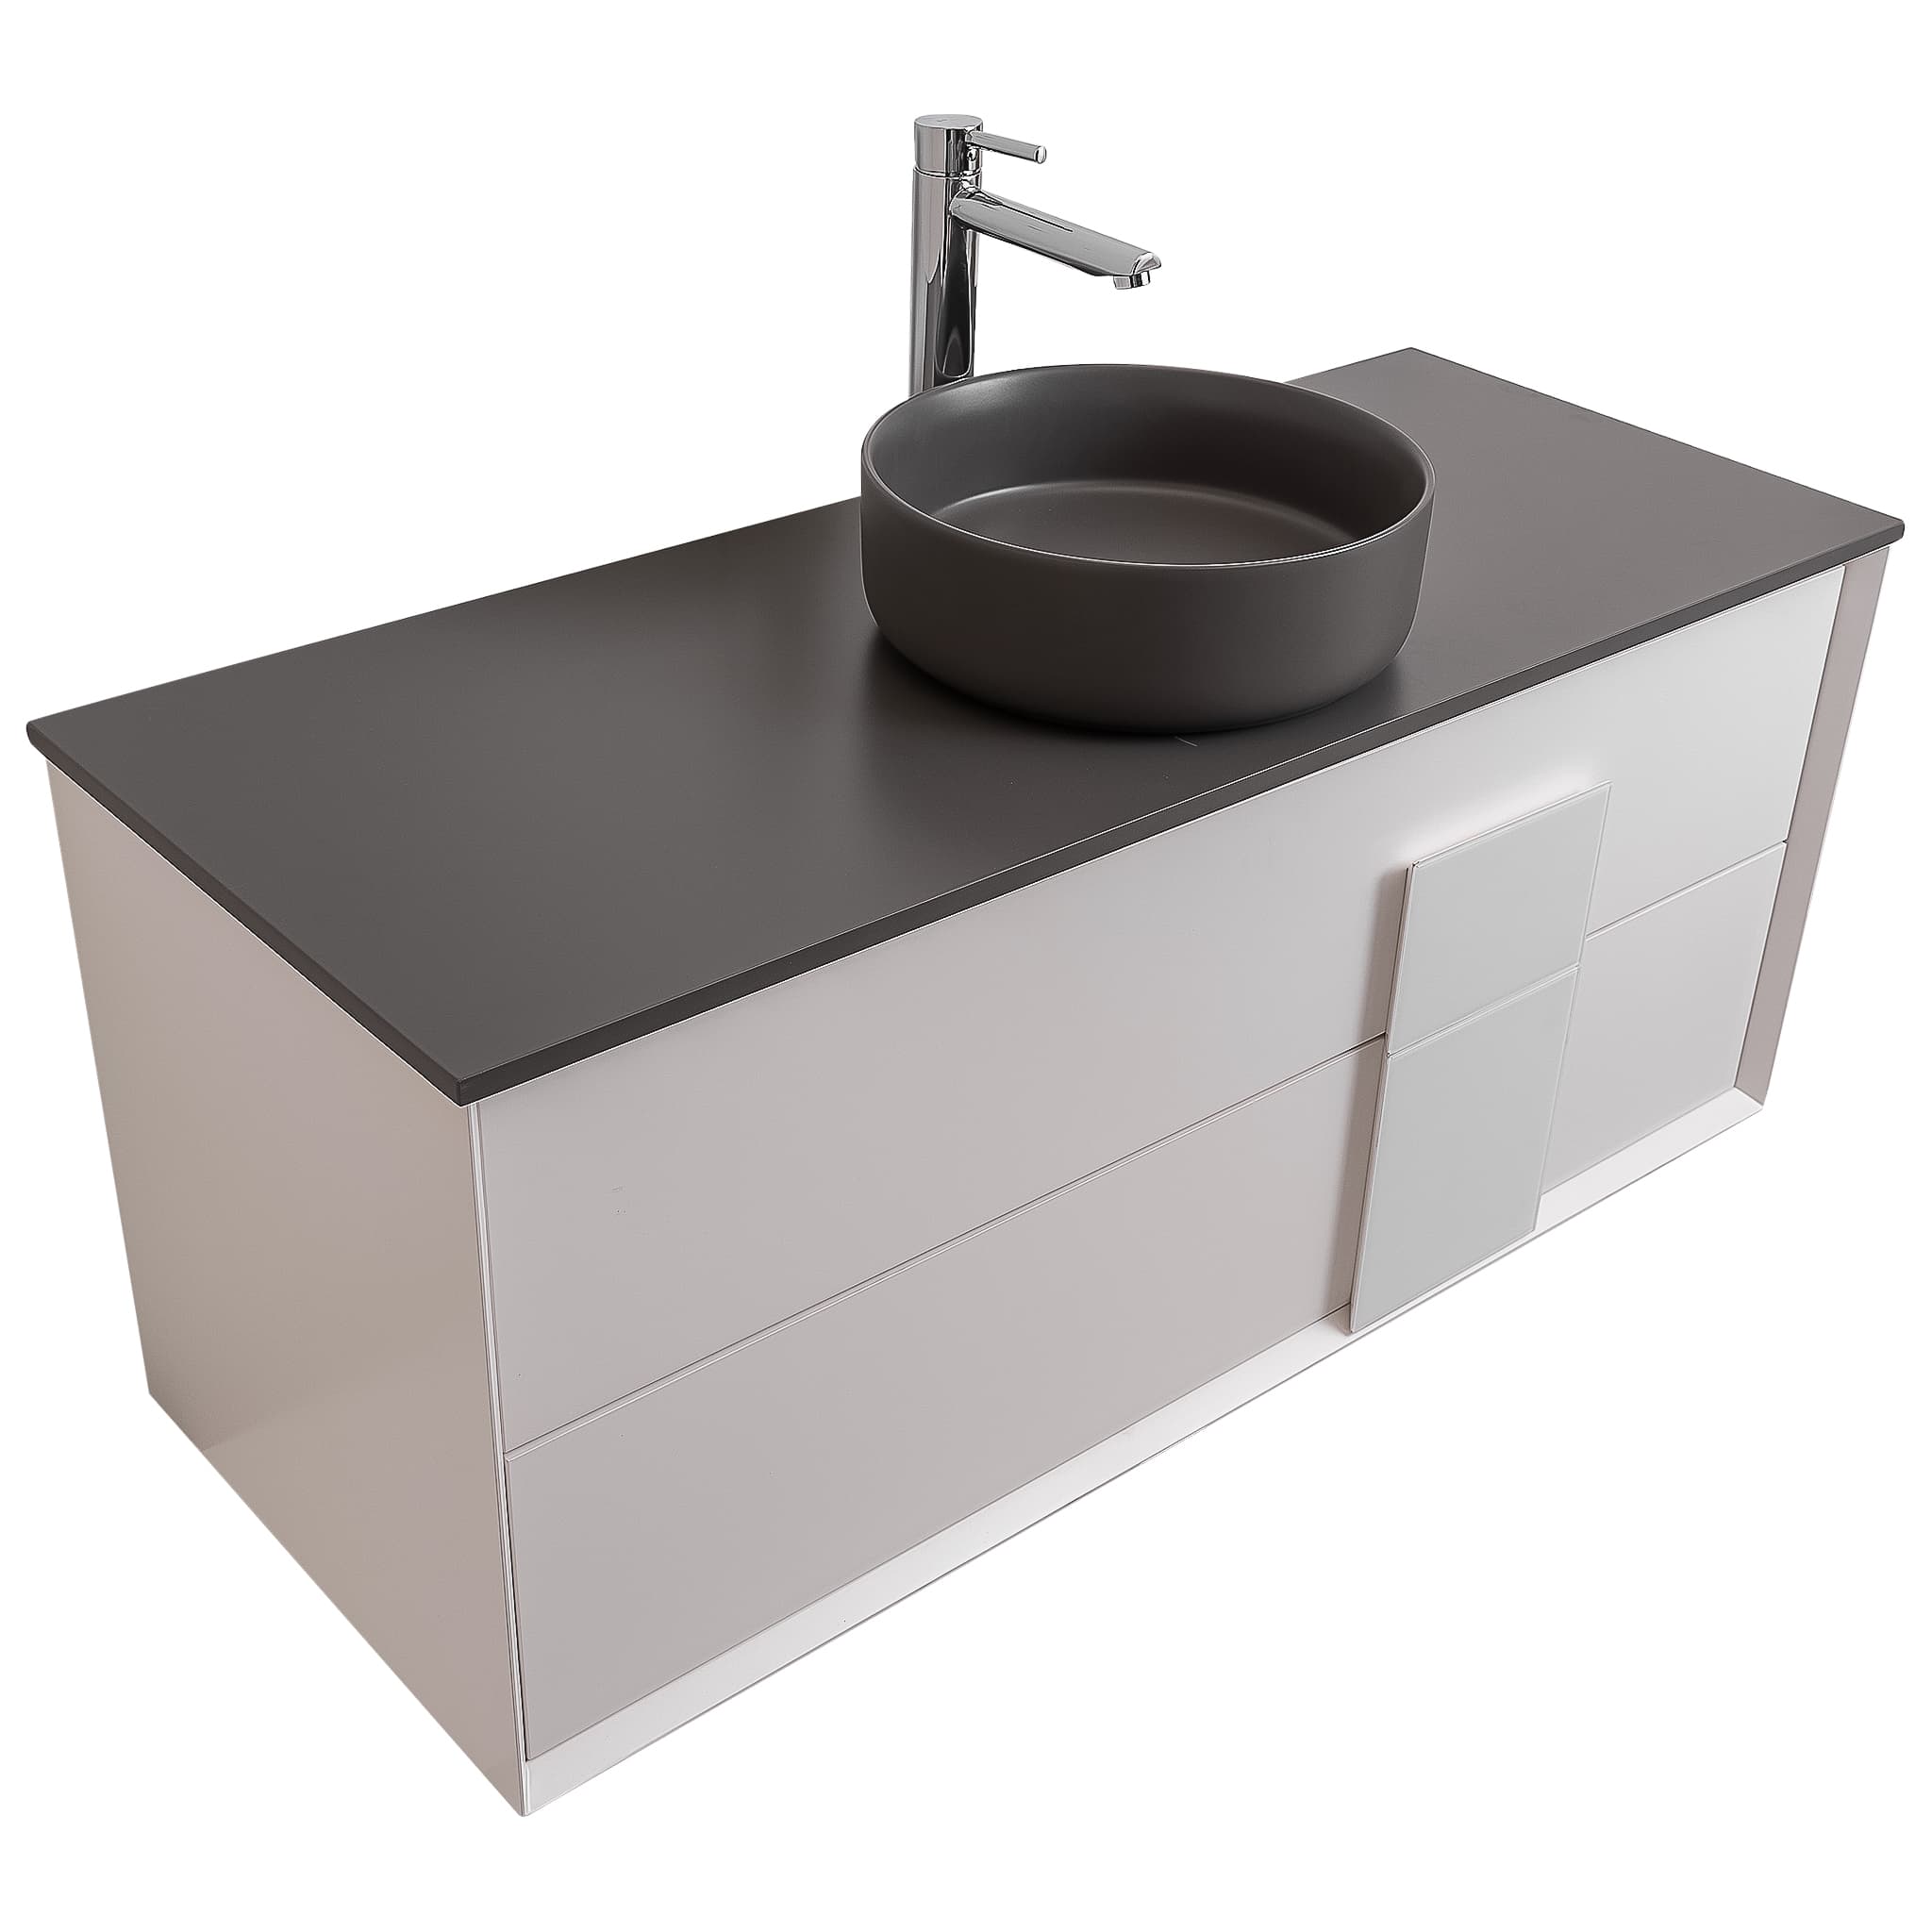 Piazza 47.5 Matte White With White Handle Cabinet, Ares Grey Ceniza Top and Ares Grey Ceniza Ceramic Basin, Wall Mounted Modern Vanity Set